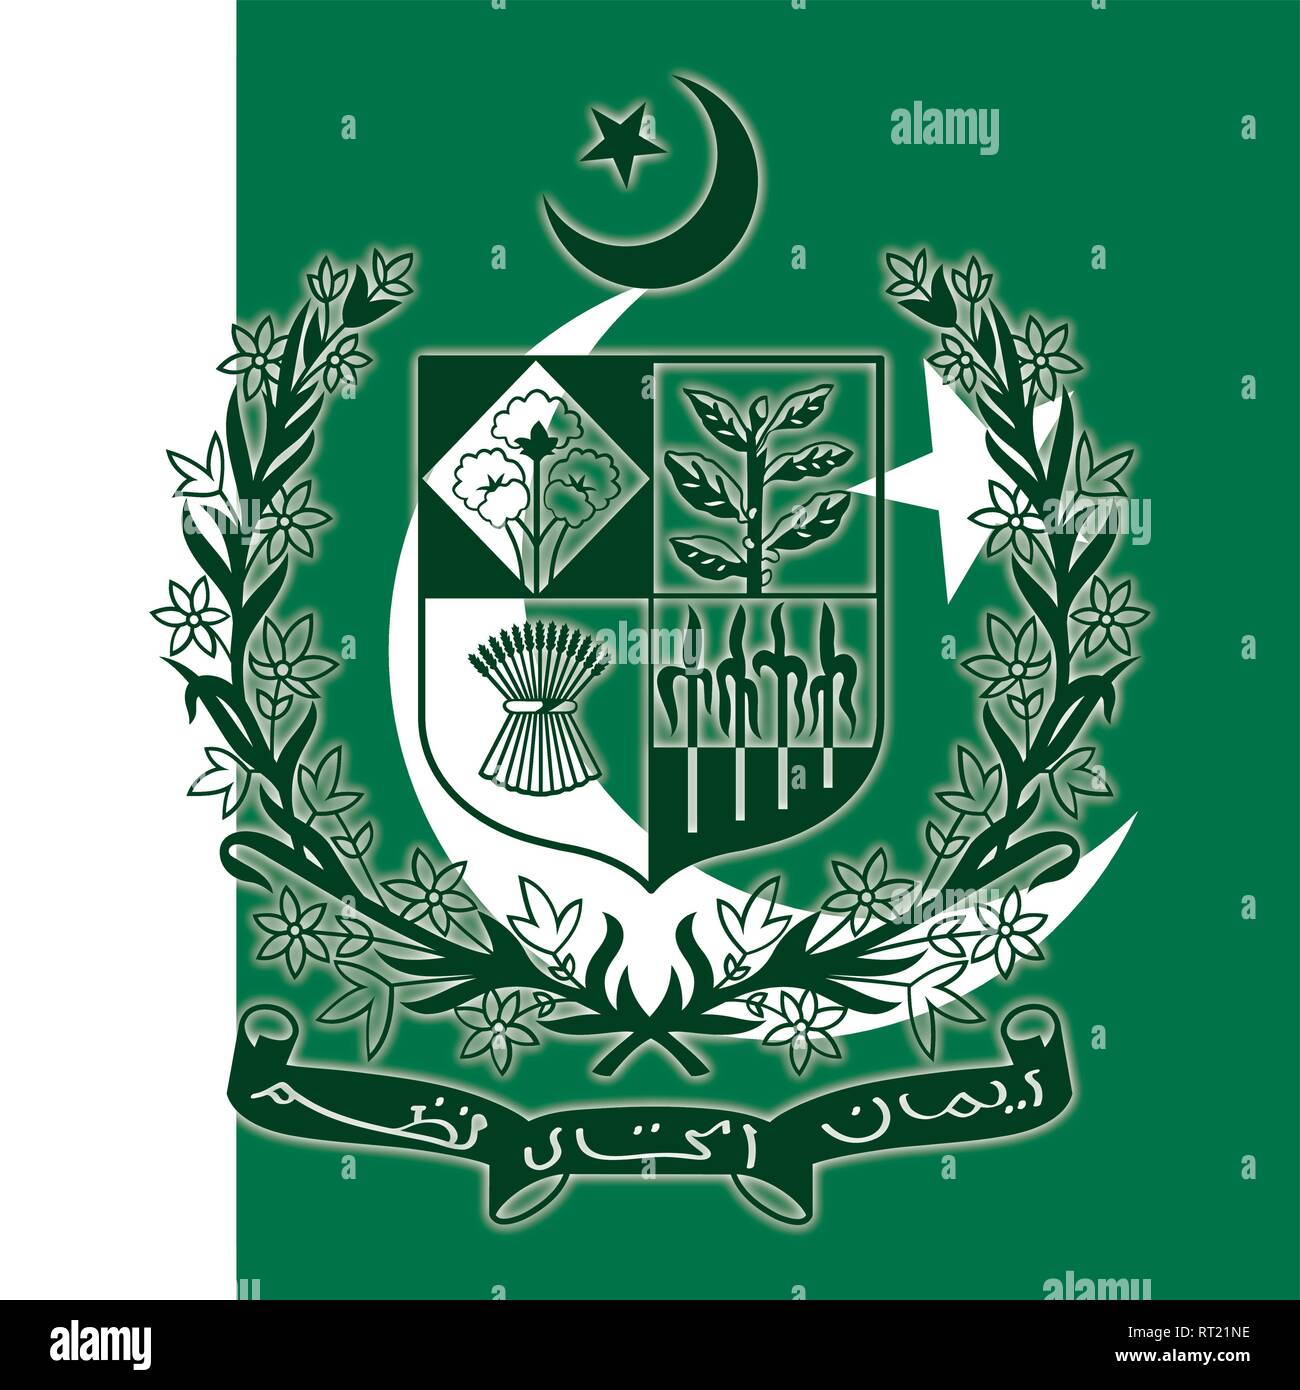 Pakistan official coat of arms on the national flag Stock Vector